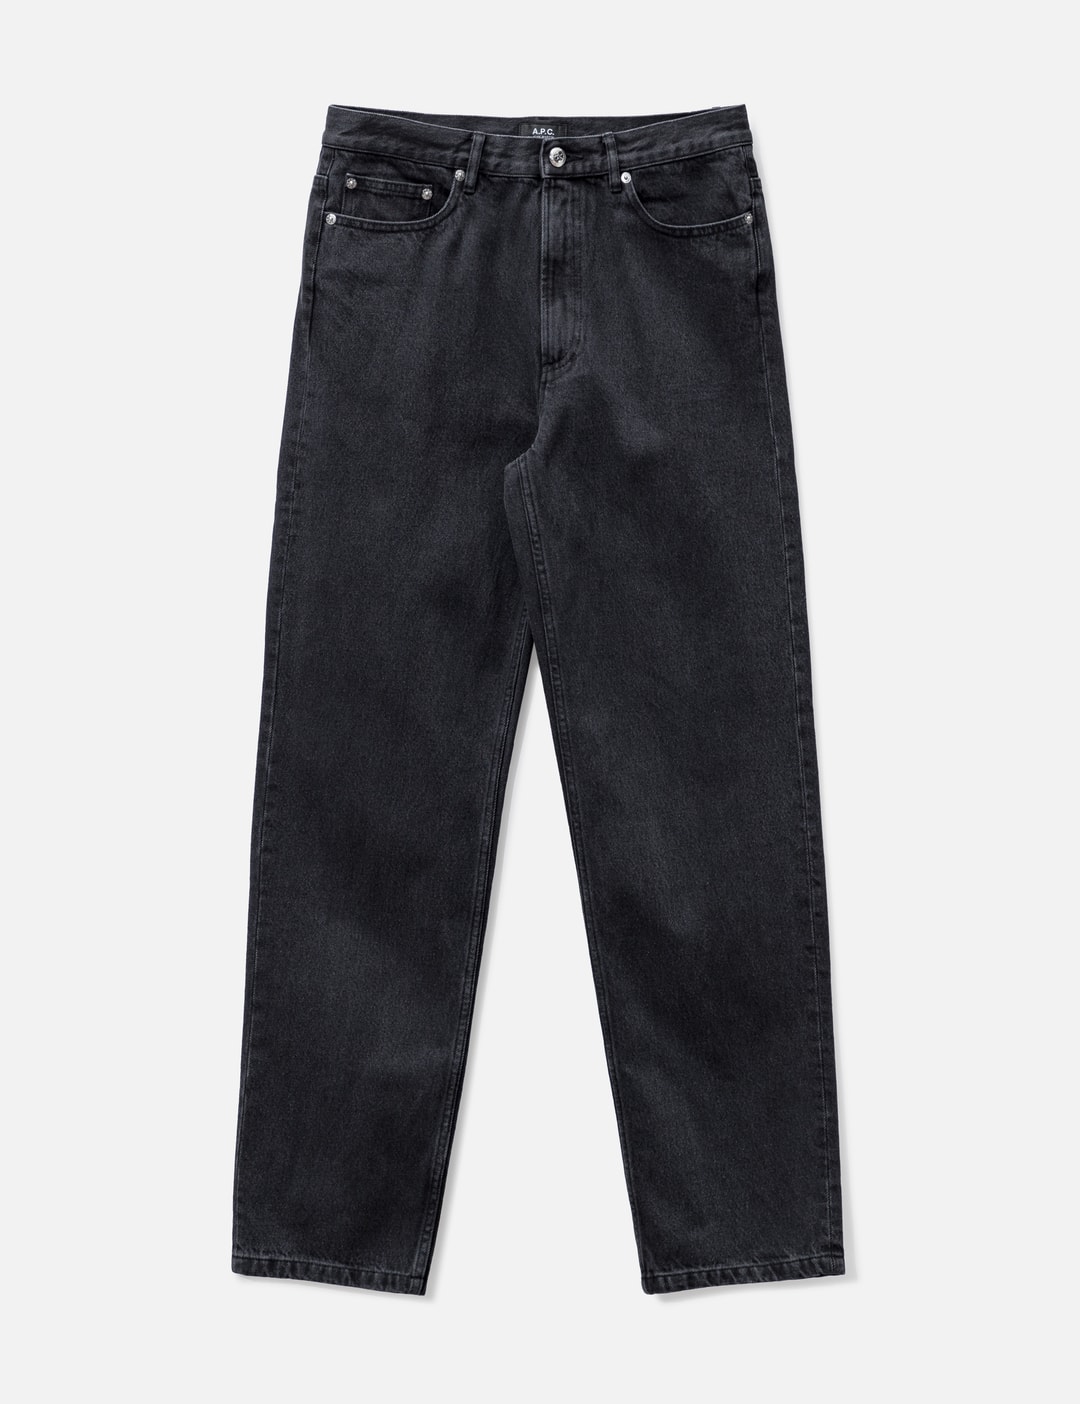 A.P.C. - Martin Jeans | HBX - Globally Curated Fashion and Lifestyle by ...